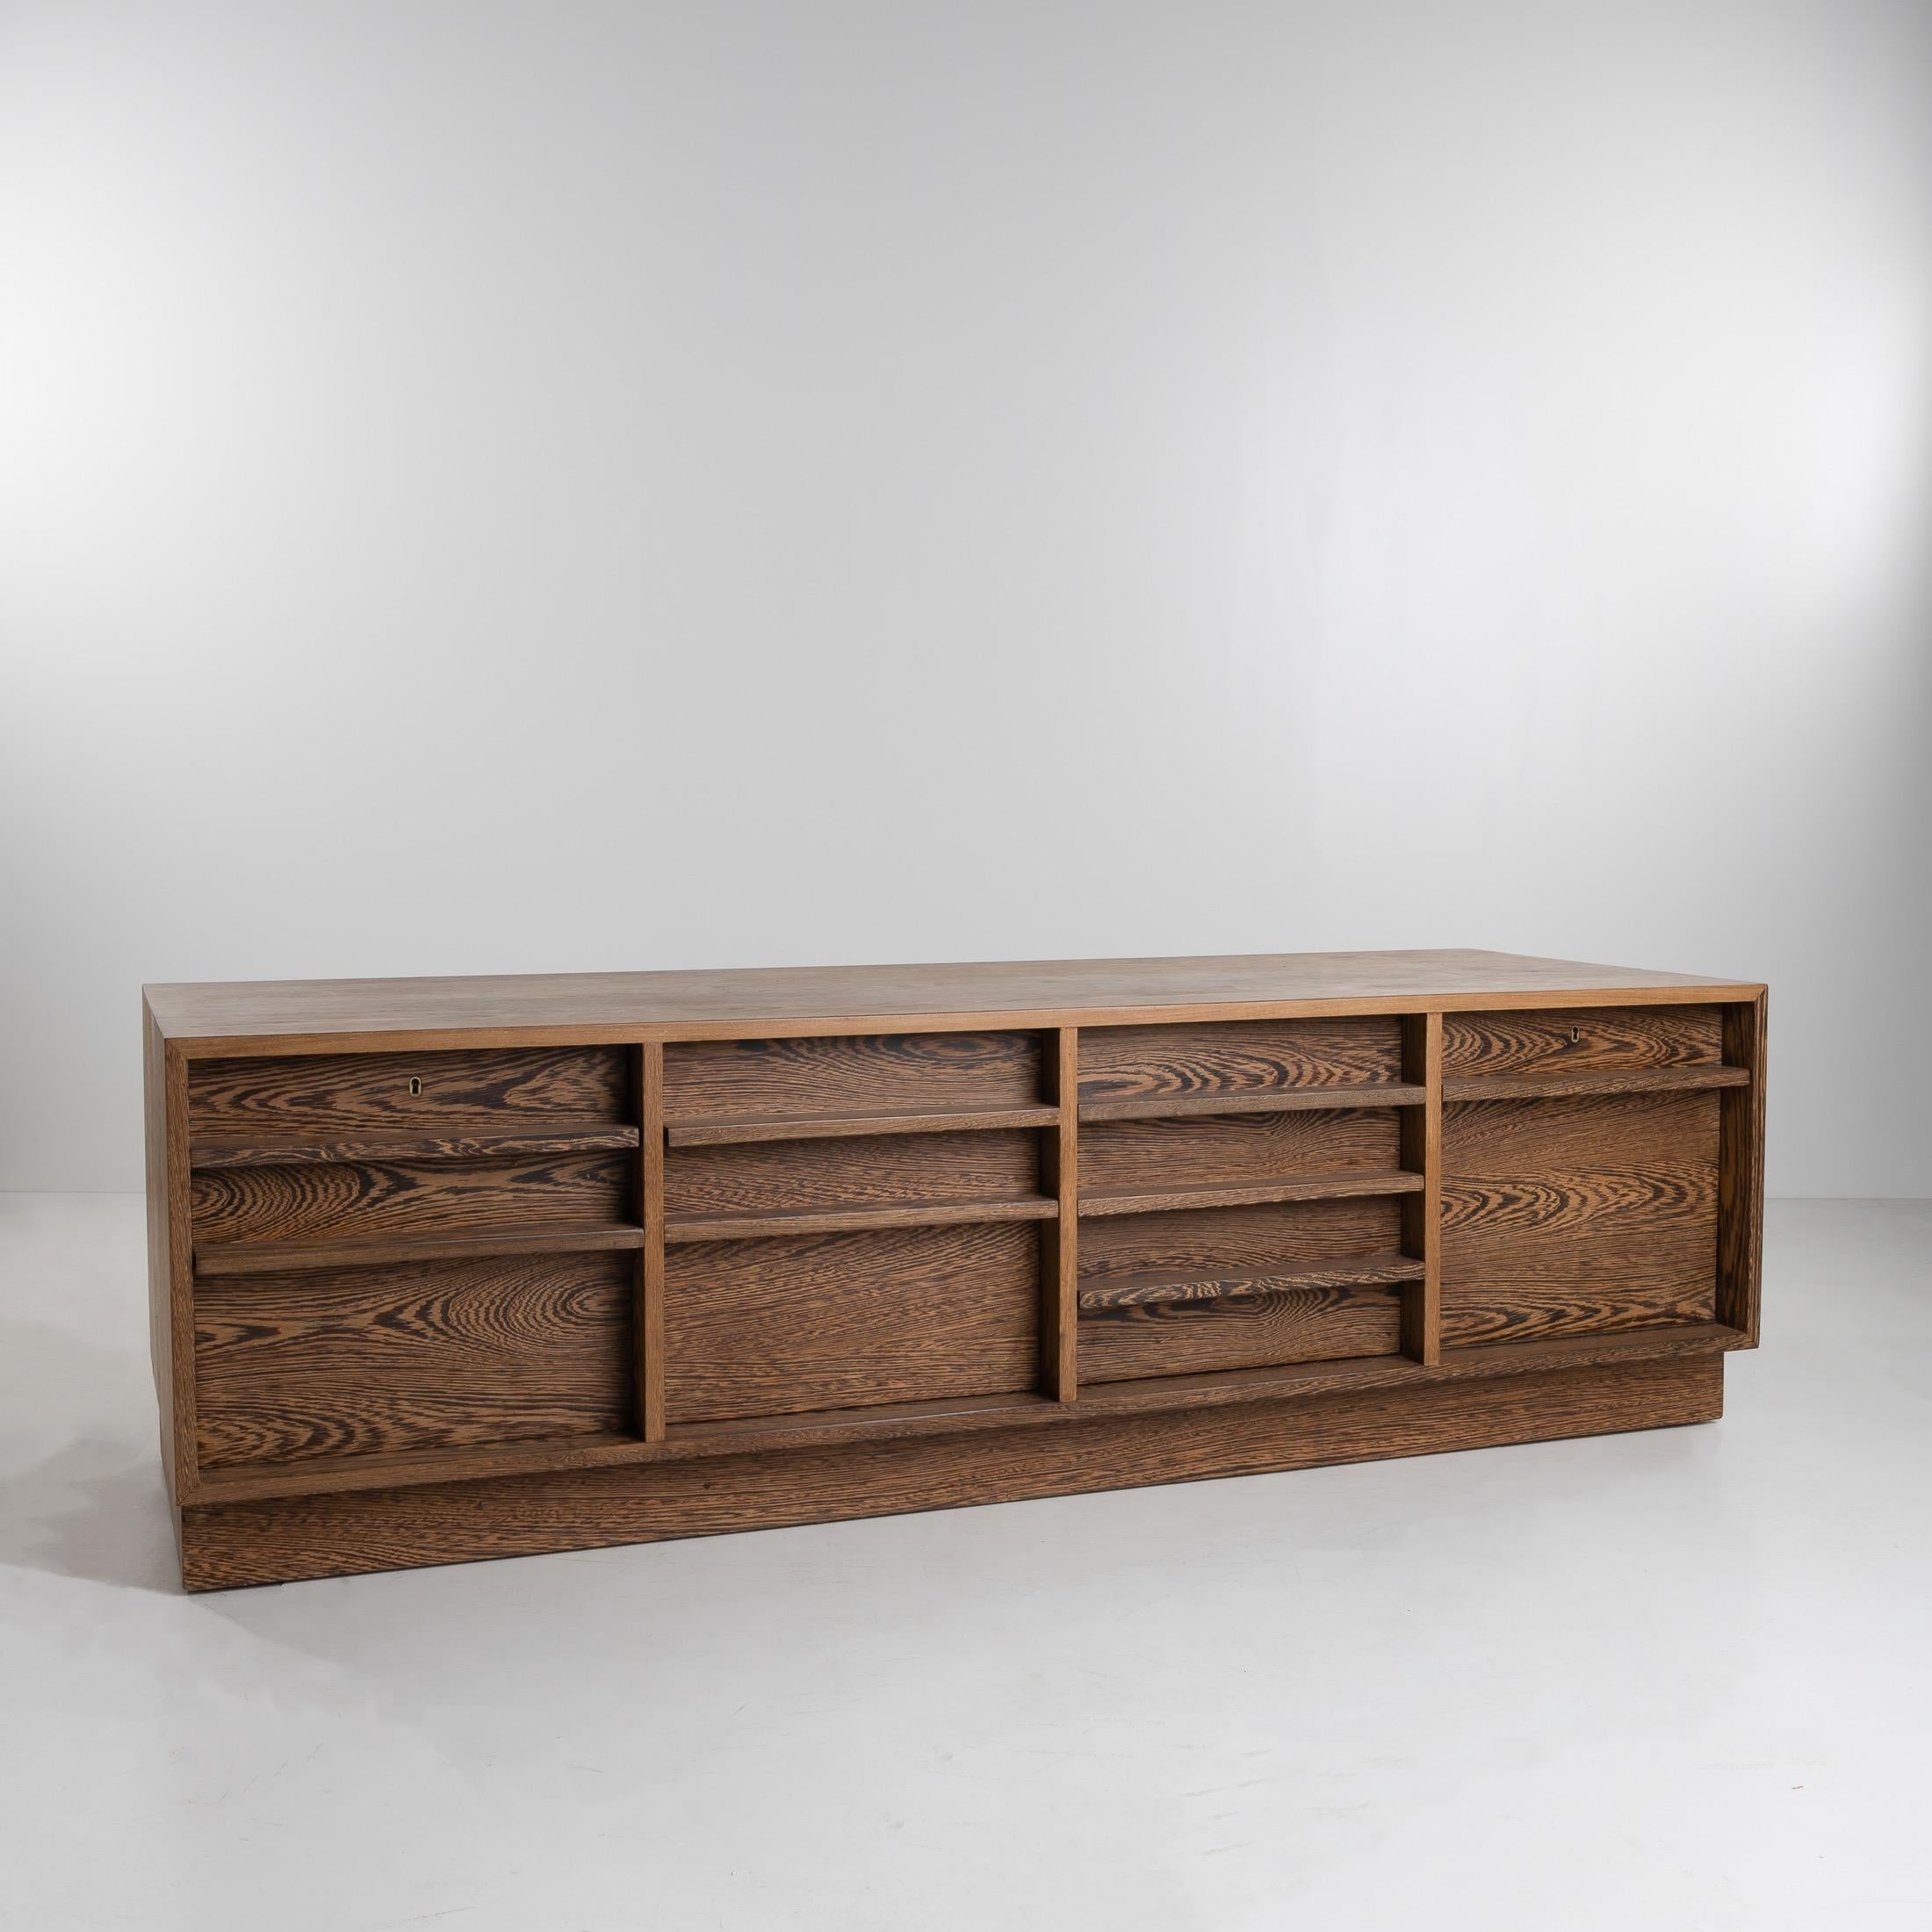 Superb credenza in Wenge designed by the Danish architect Bodil Kjaer in 1959 and produced by E. Pedersen & Søn.
In solid wood and Wenge veneer, this credenza offers ample storage space with its many drawers and compartments.
This is an